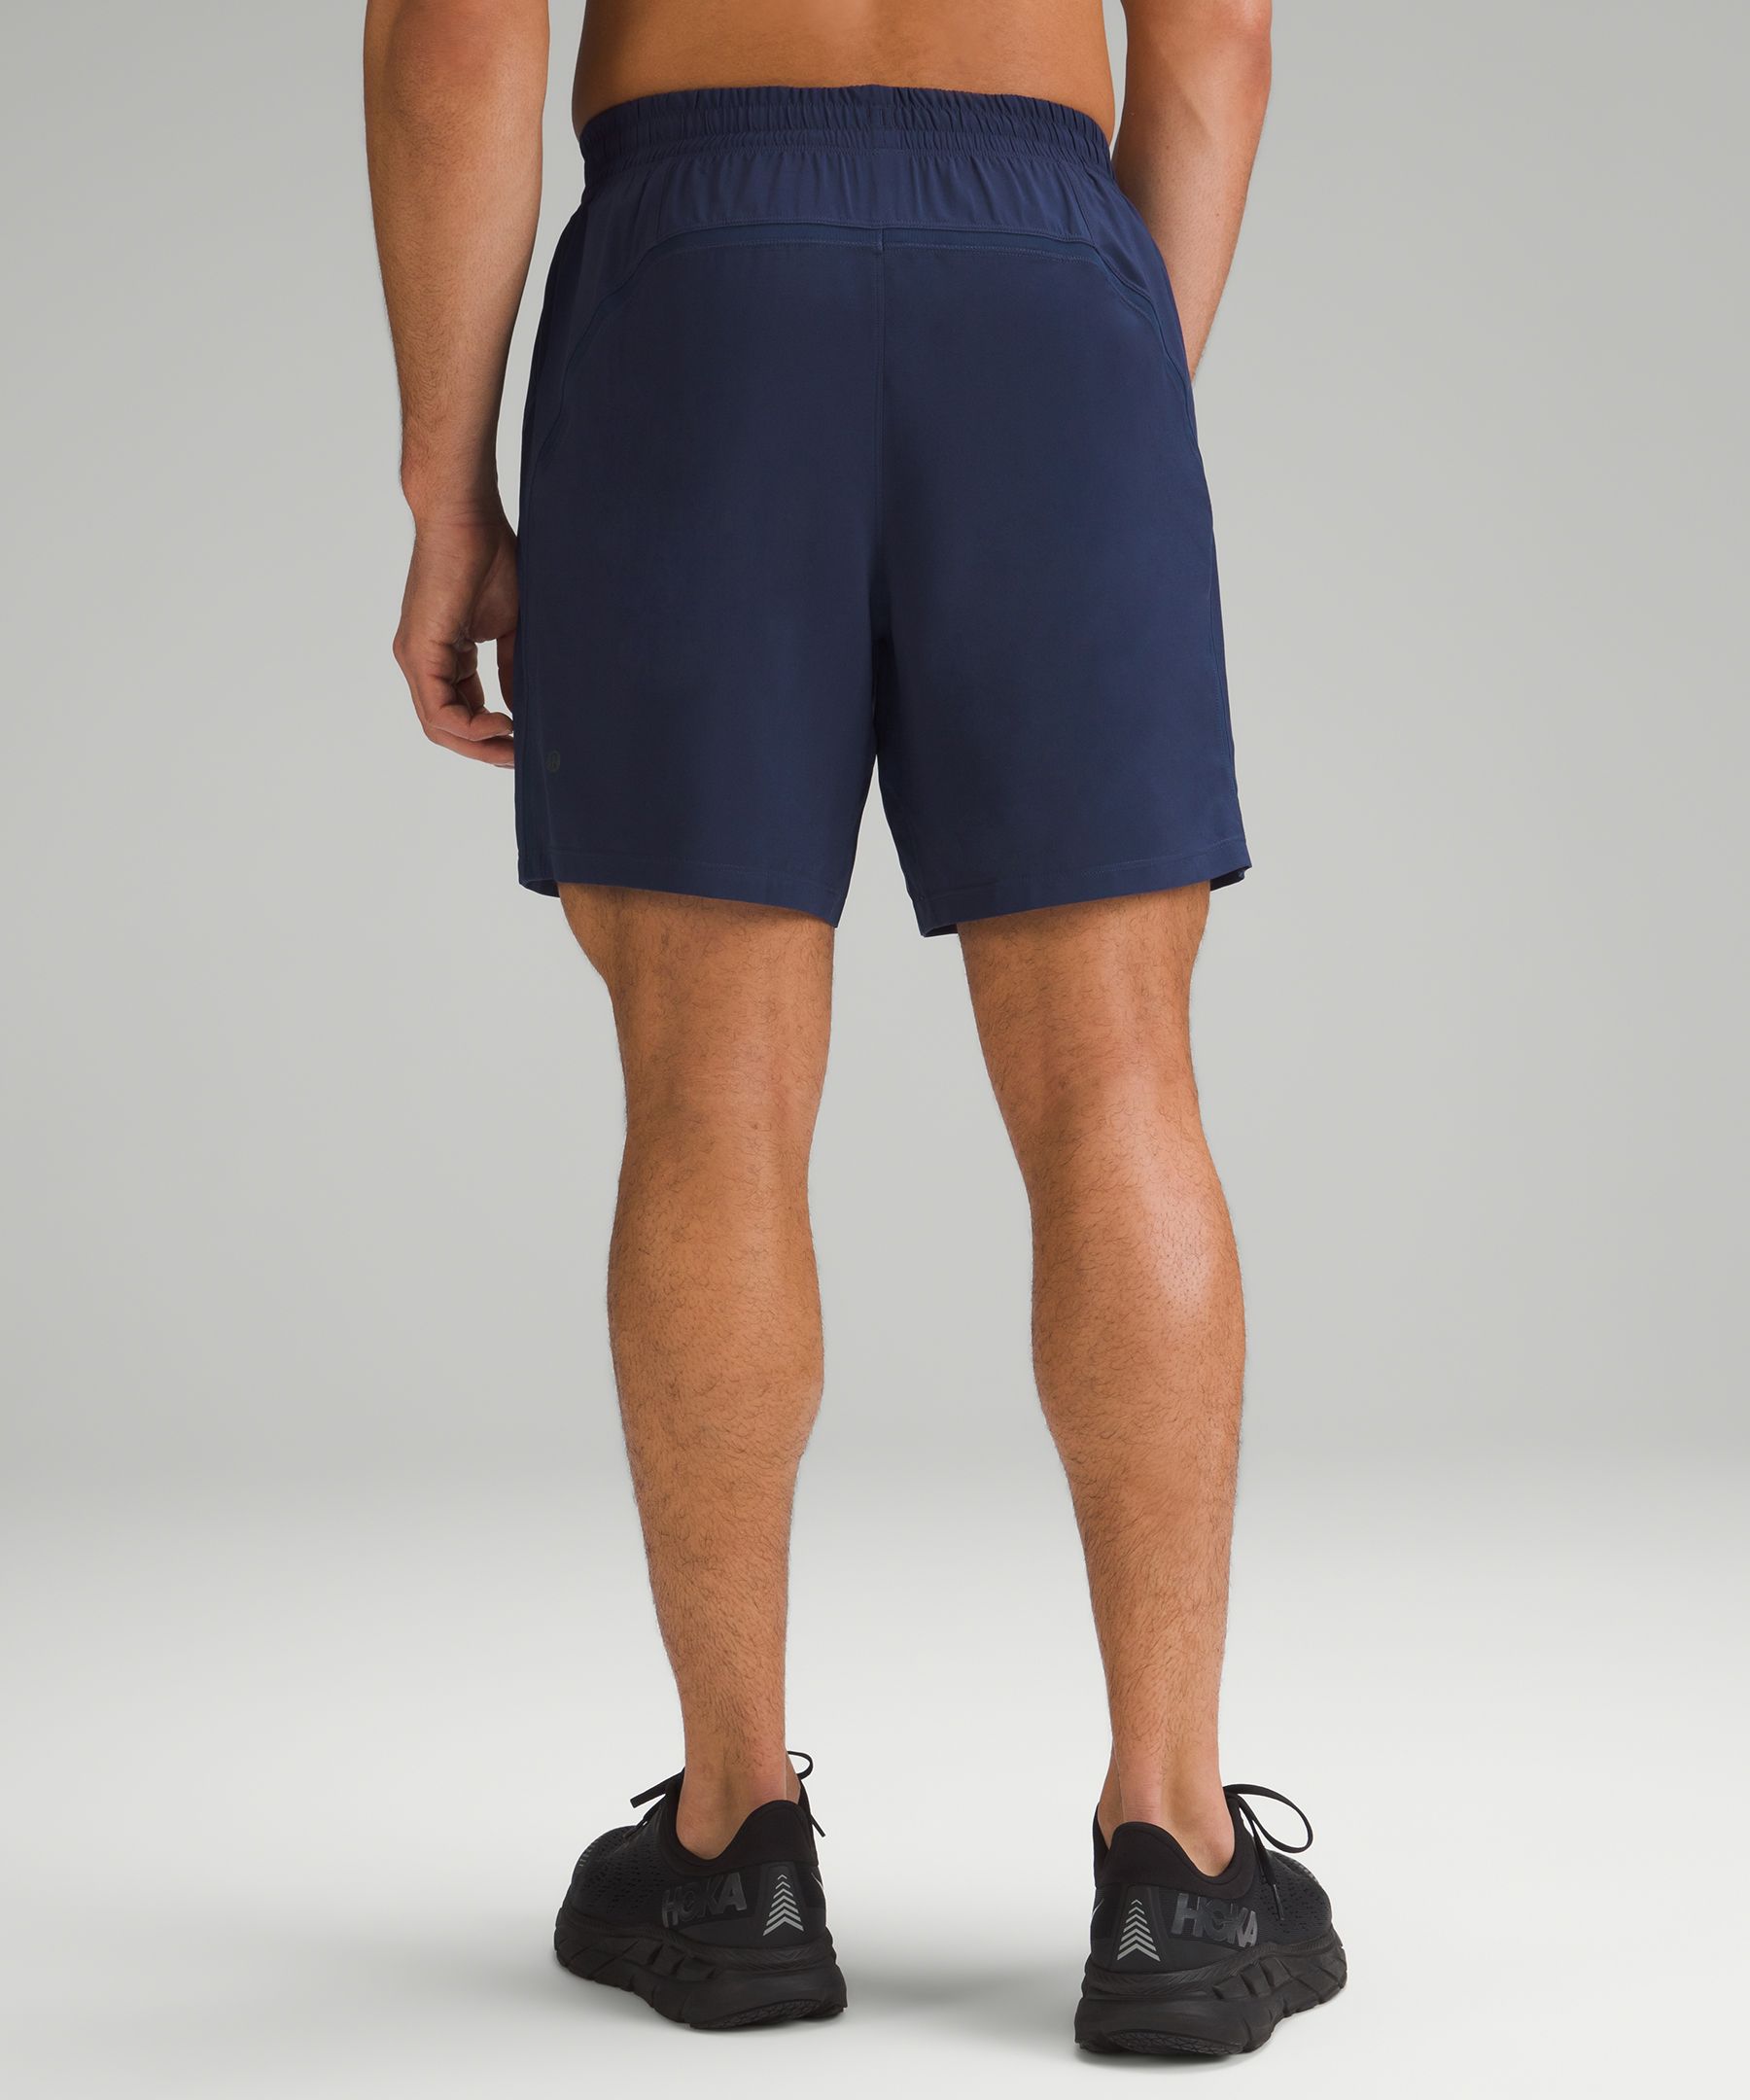 Men's Compression-Lined 7 Short - Hydrow Apparel Store